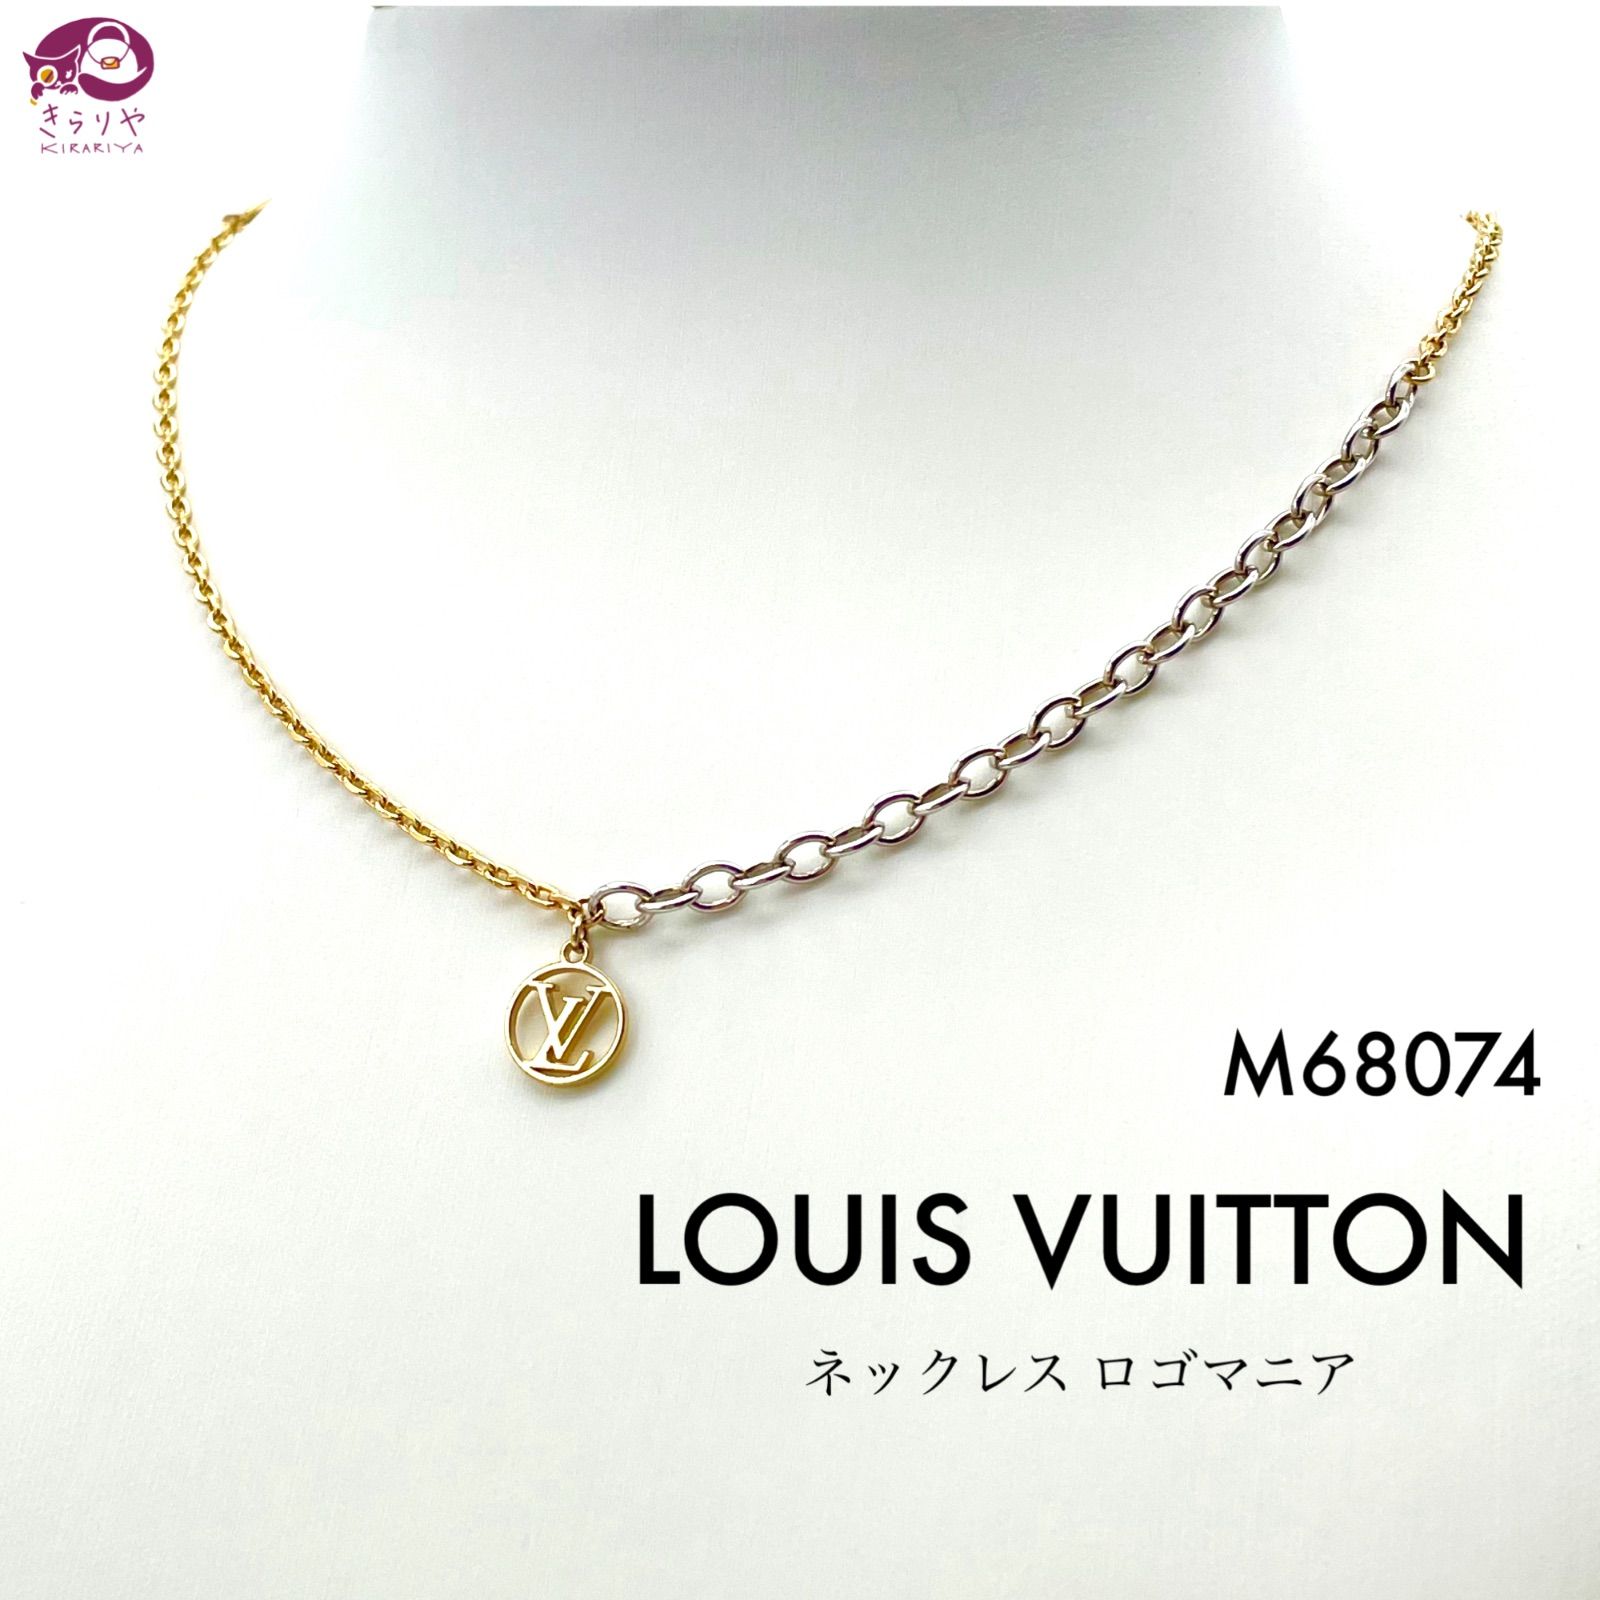 LOUIS VUITTON ルイヴィトン M68074 ネックレス ロゴマニア